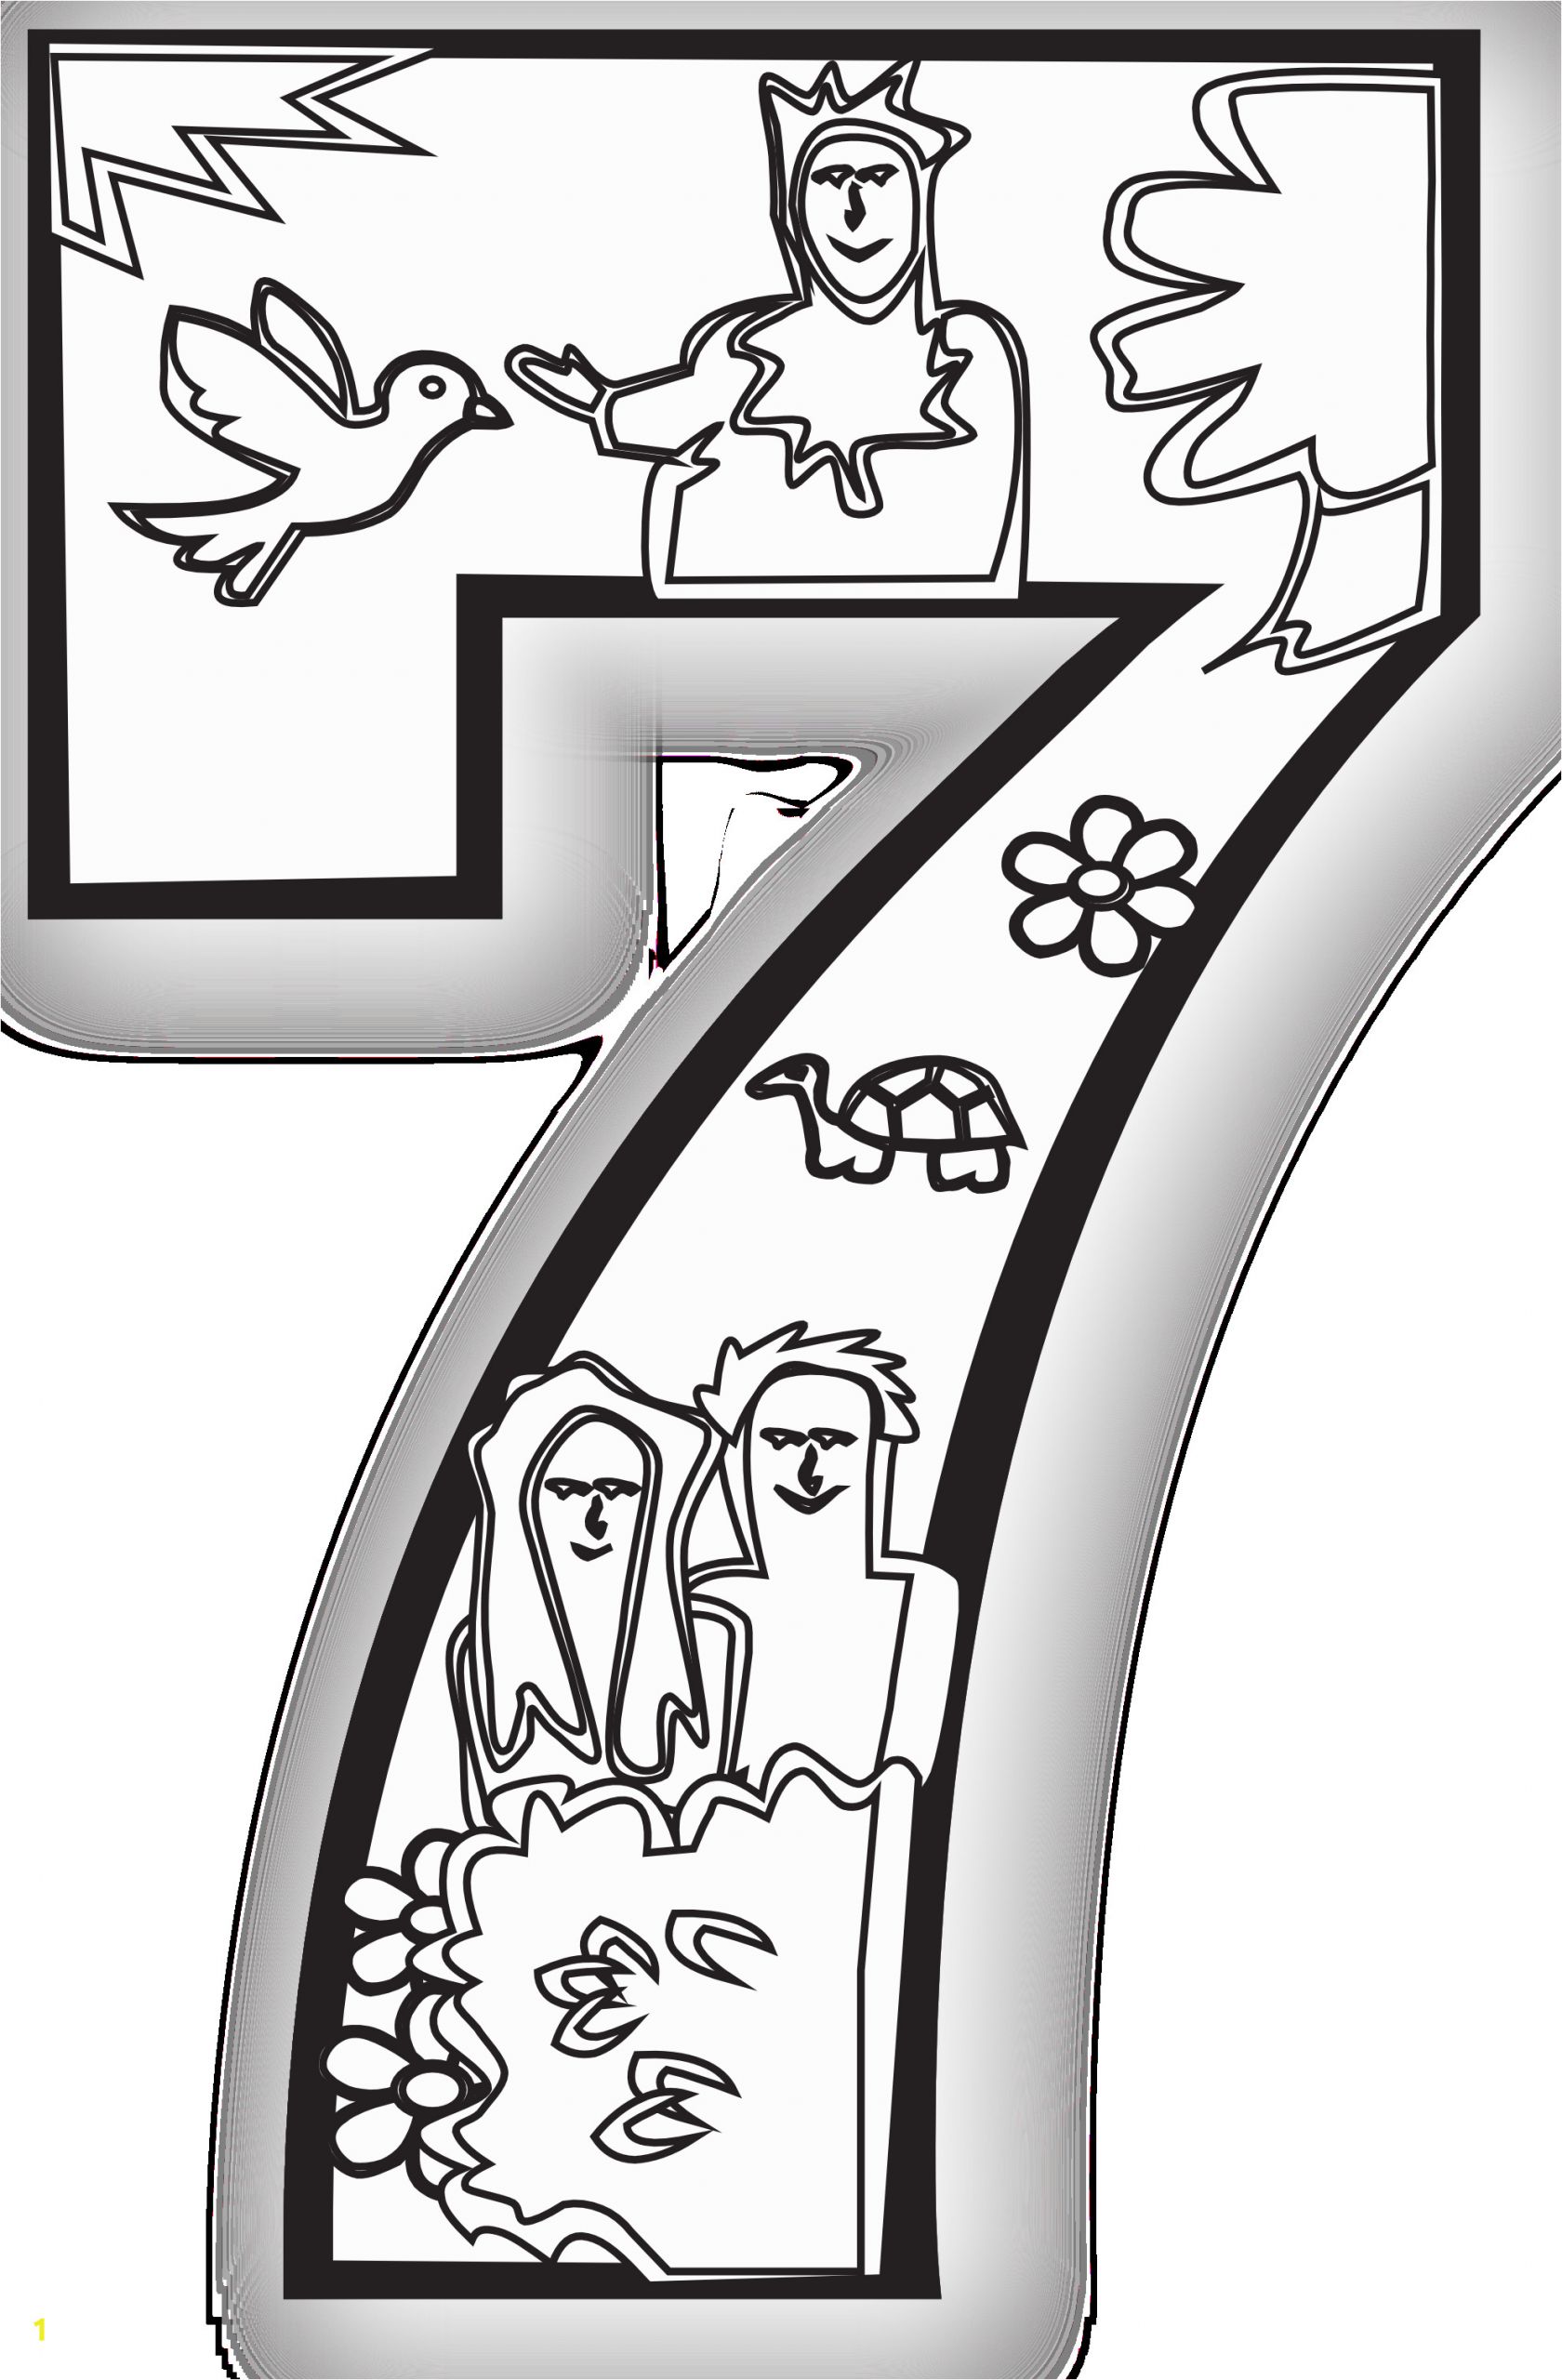 7 Days Of Creation Coloring Pages This Kind Of On Line Coloring Page for Children Will